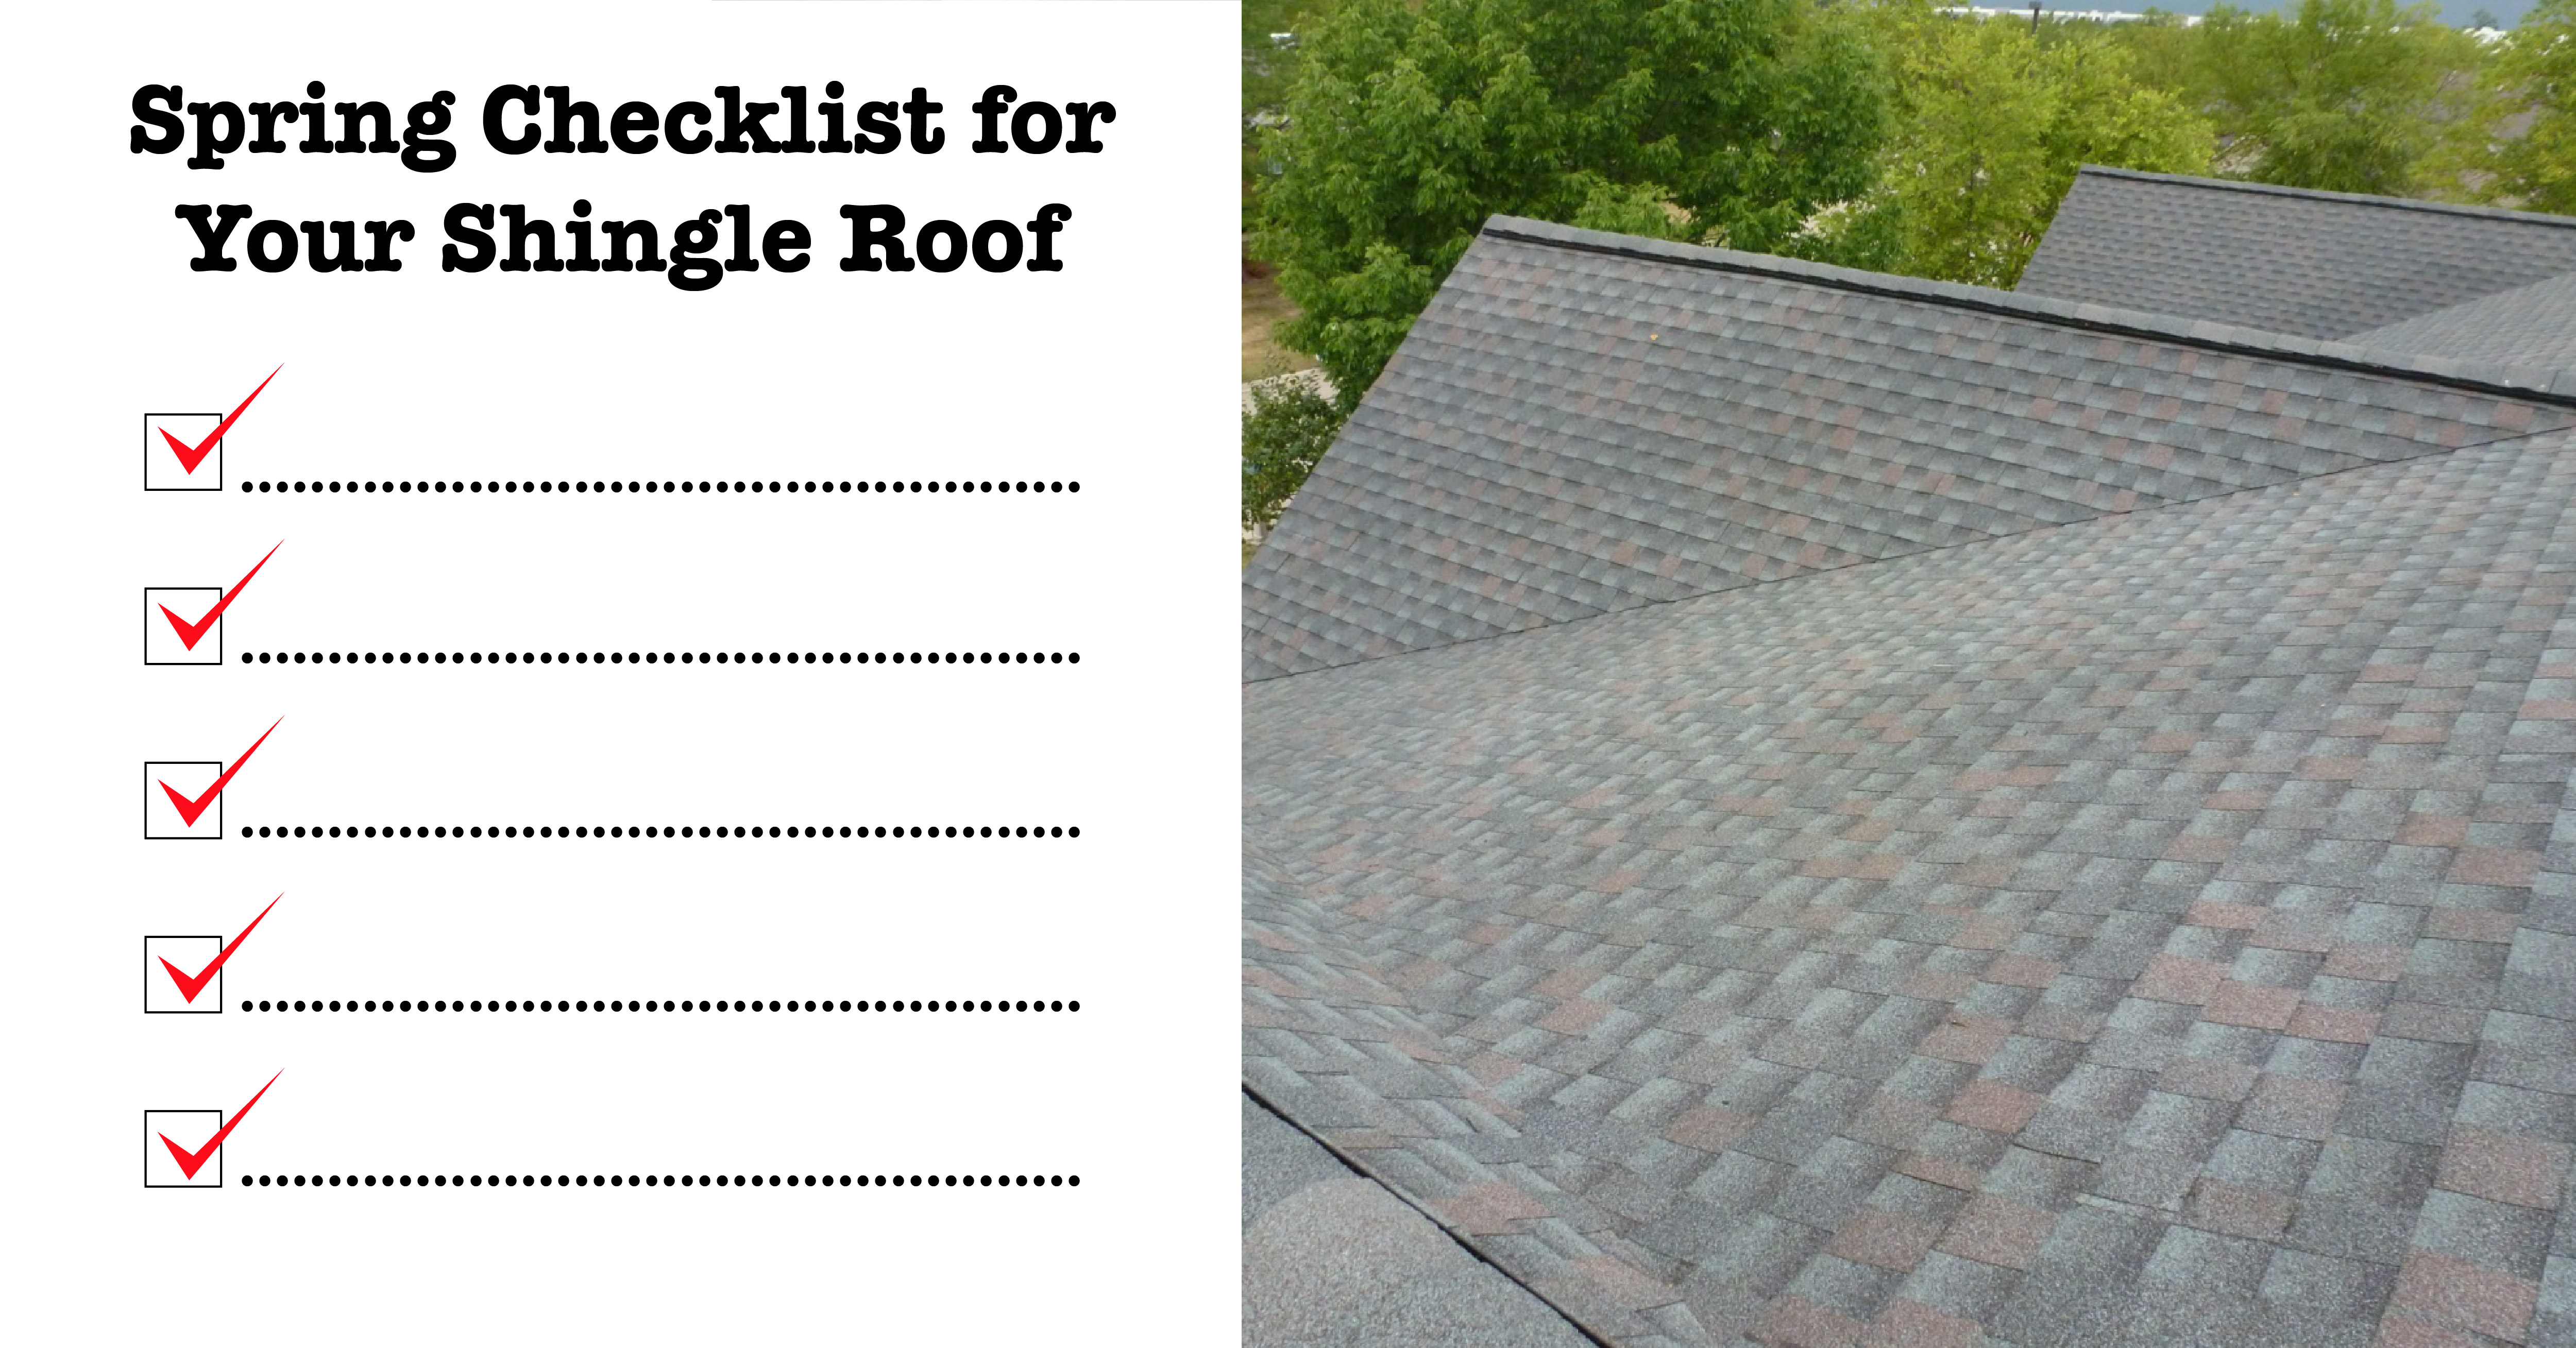 Spring Checklist for Your Shingle Roof